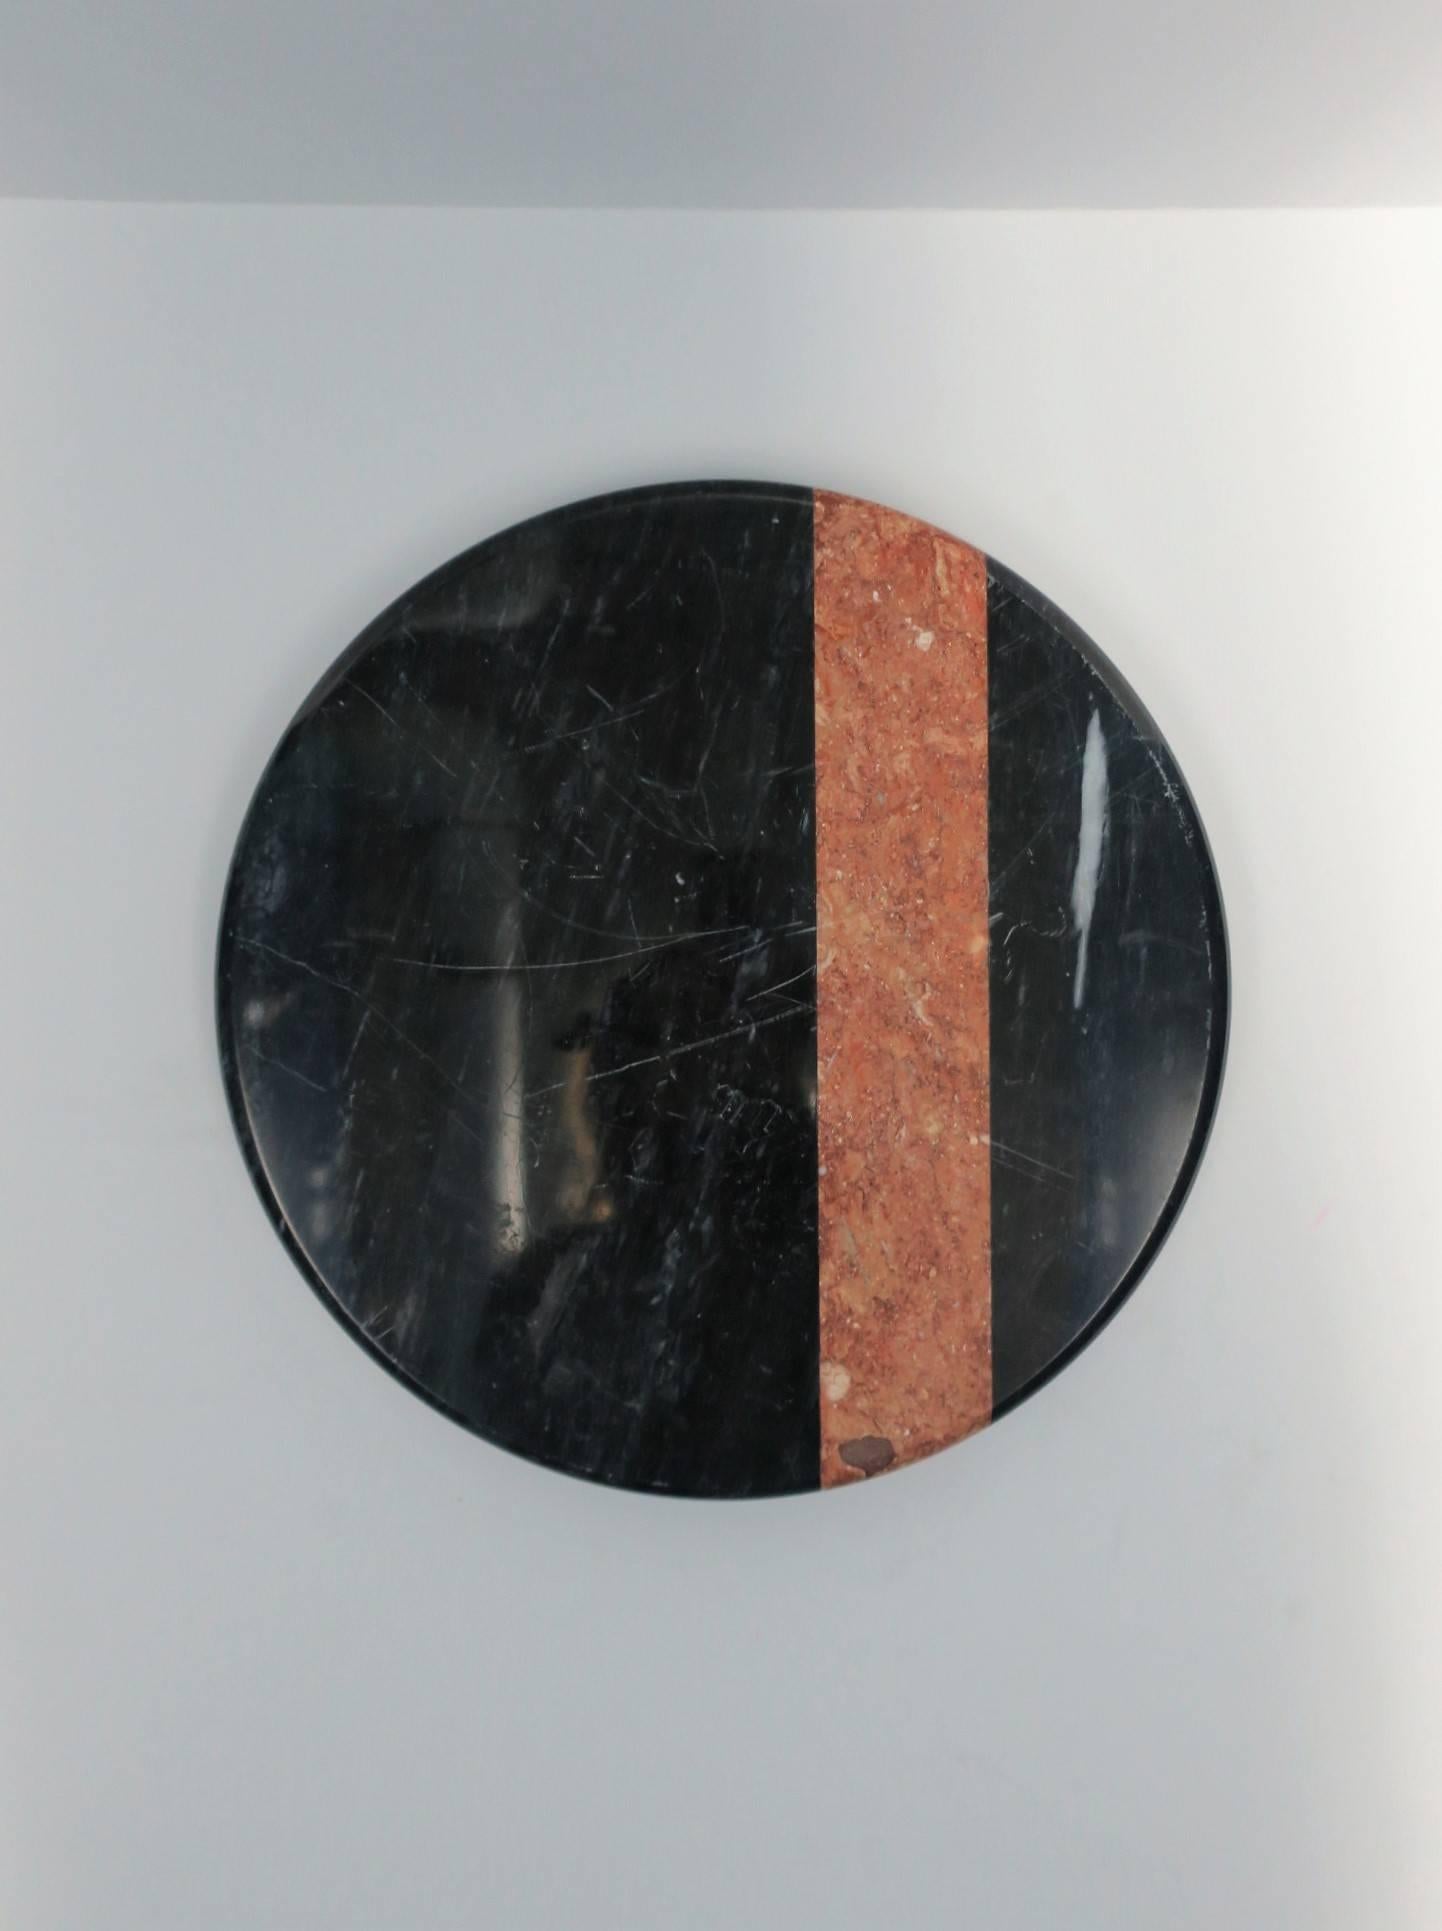 A vintage Modern black and red-ish marble Lazy Susan, from designer Georges Briard, circa 1970s. A chic piece for your kitchen or entertaining. Use it to hold salt/pepper, condiments, or use to hold small appetizers, cheese/meat platter for